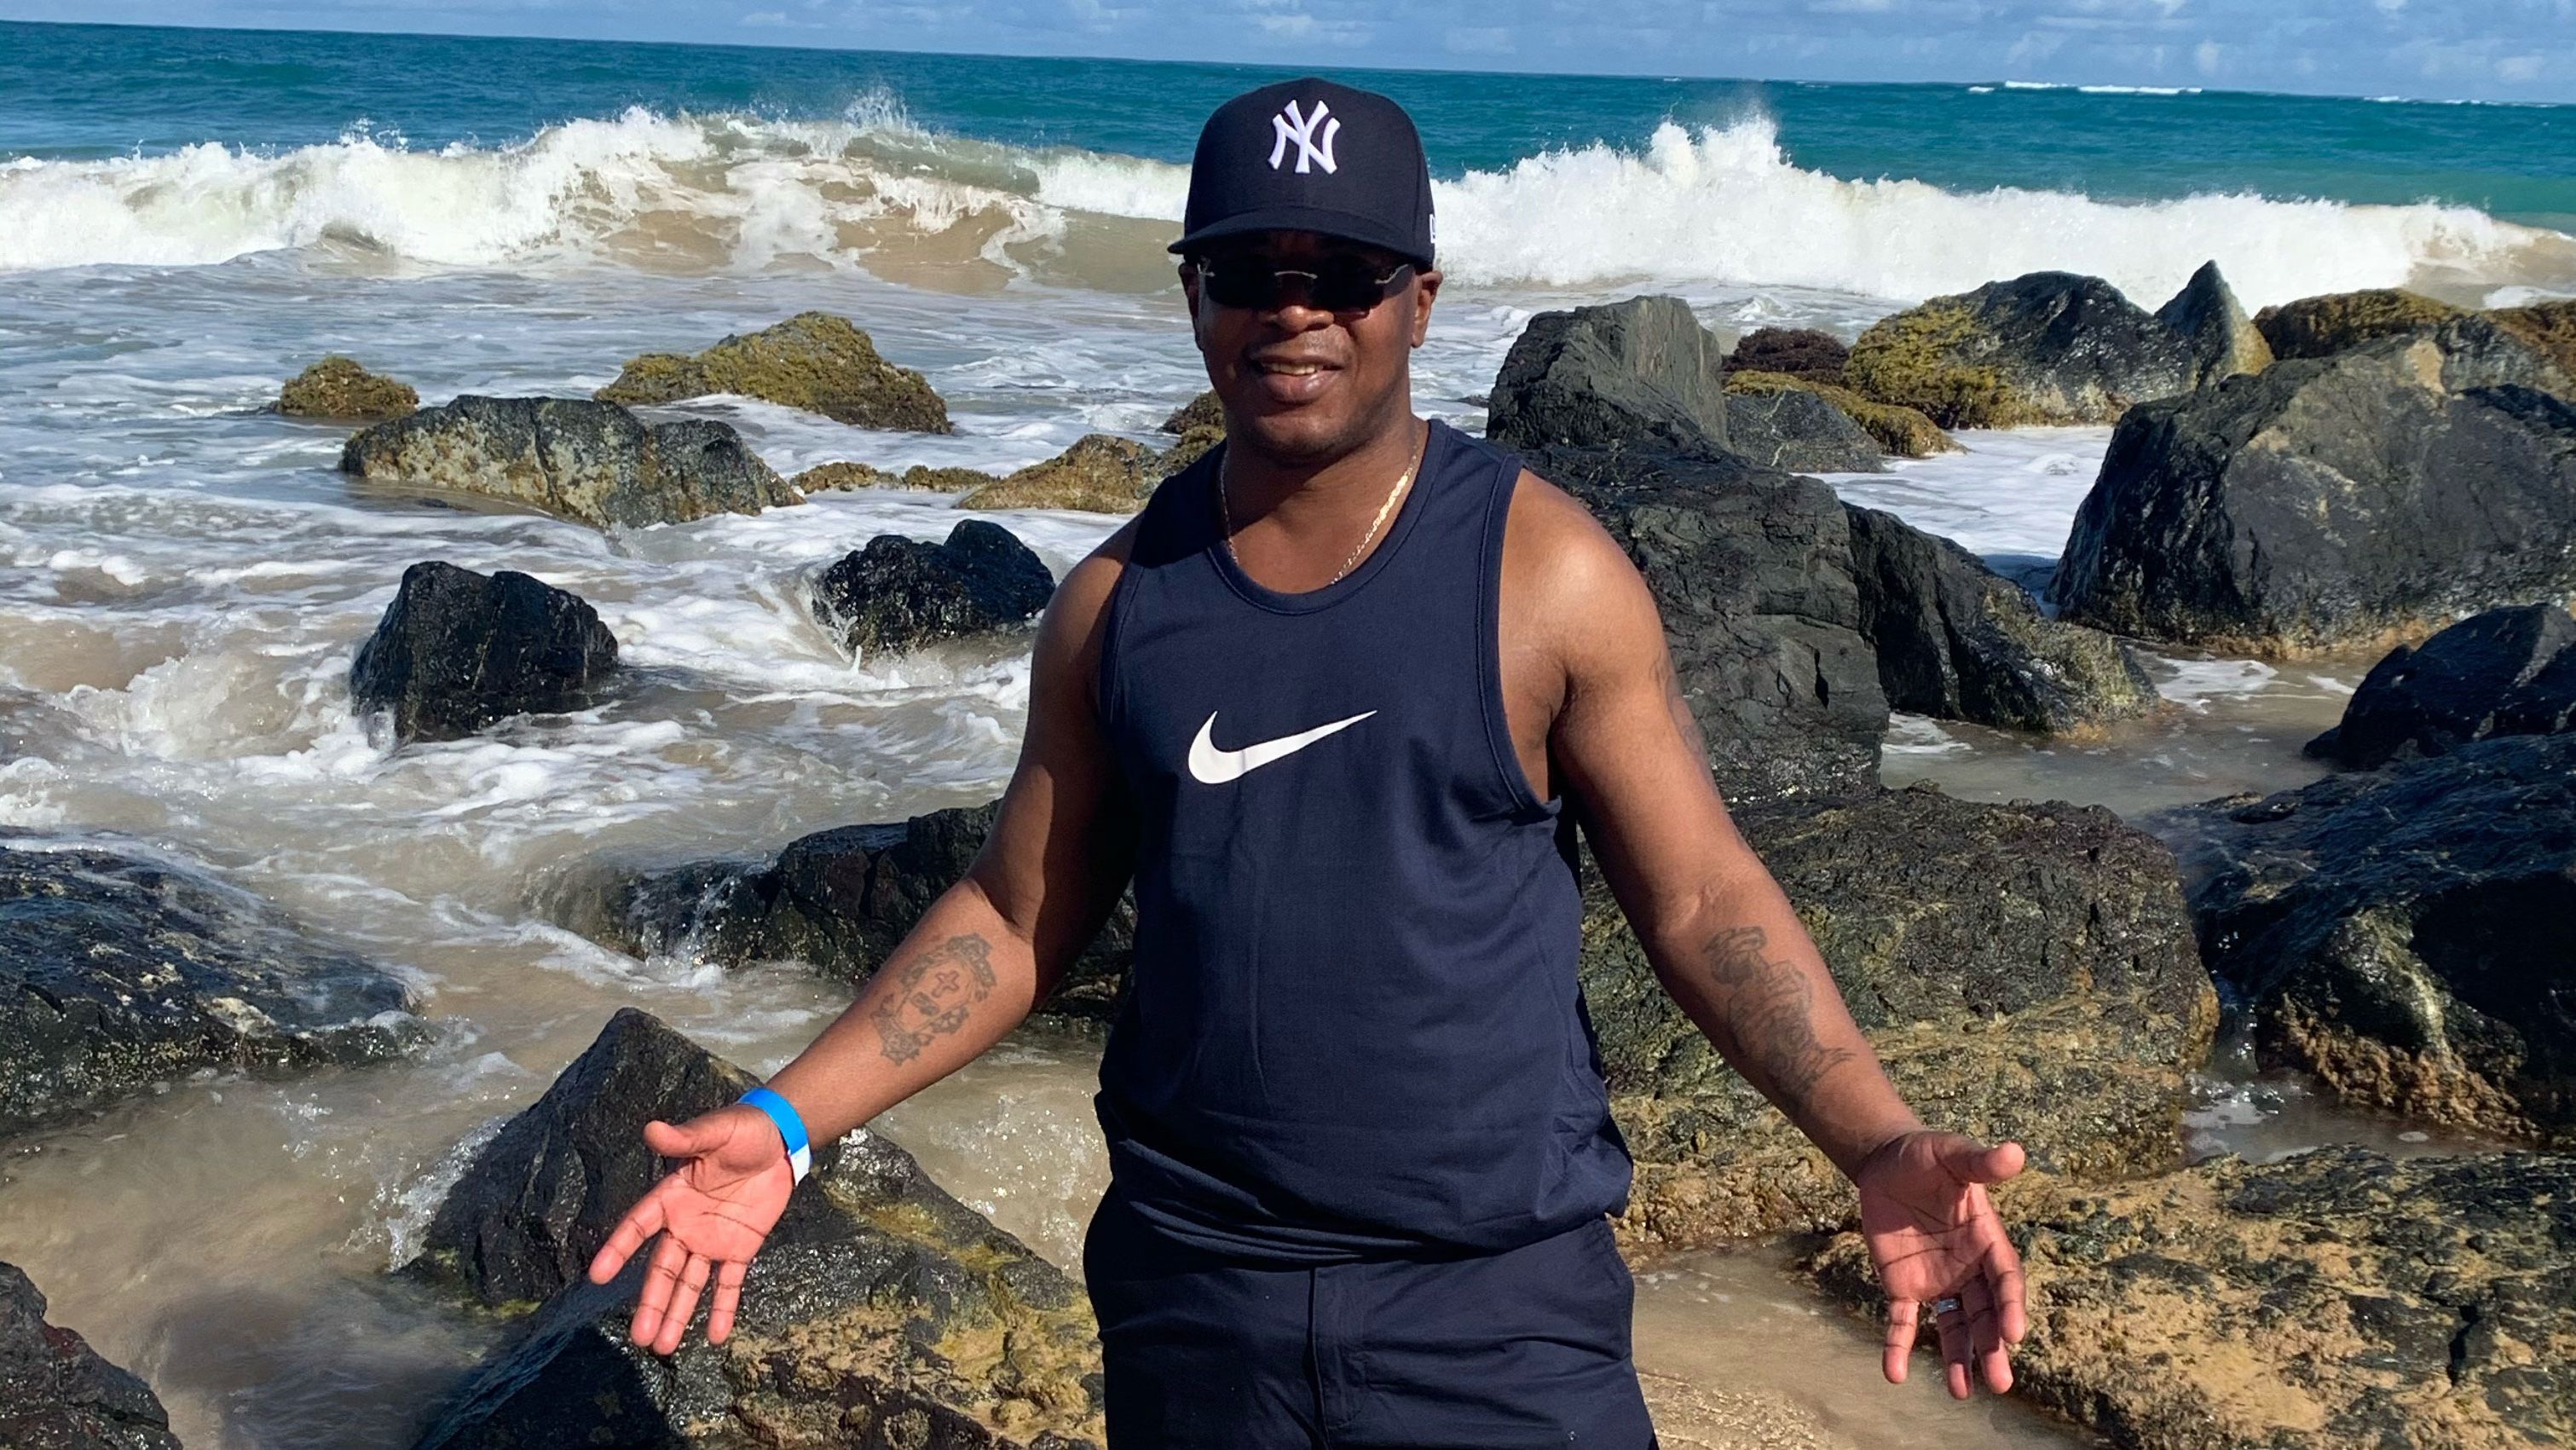 Cooper on vacation. He said his faith in God helped him make it through 27 years in prison.